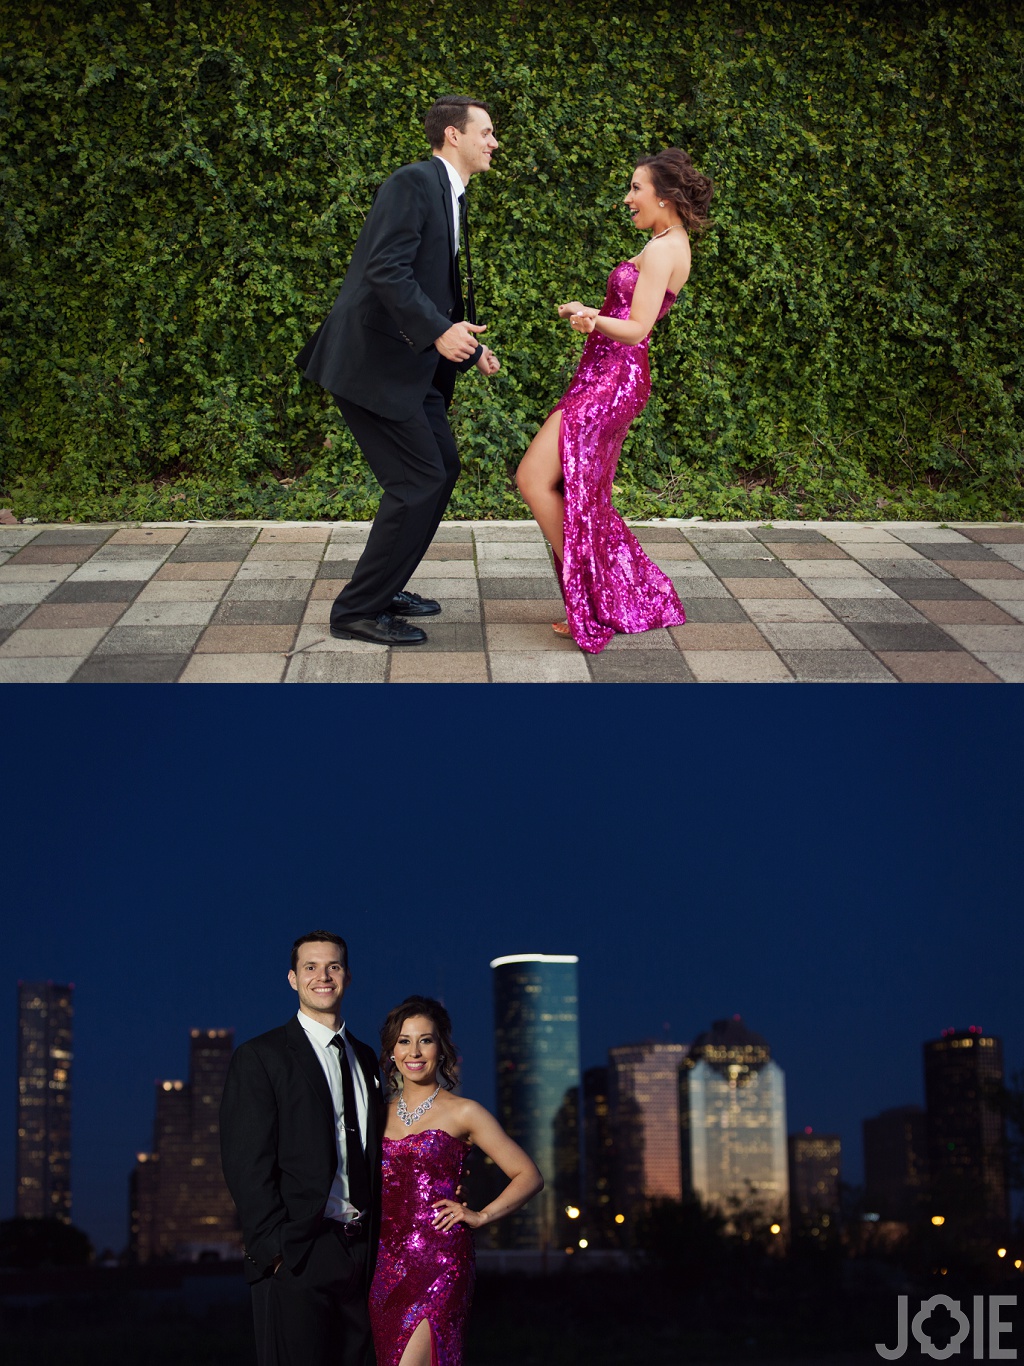 formal downtown houston engagement session at night by Joie Photographie 